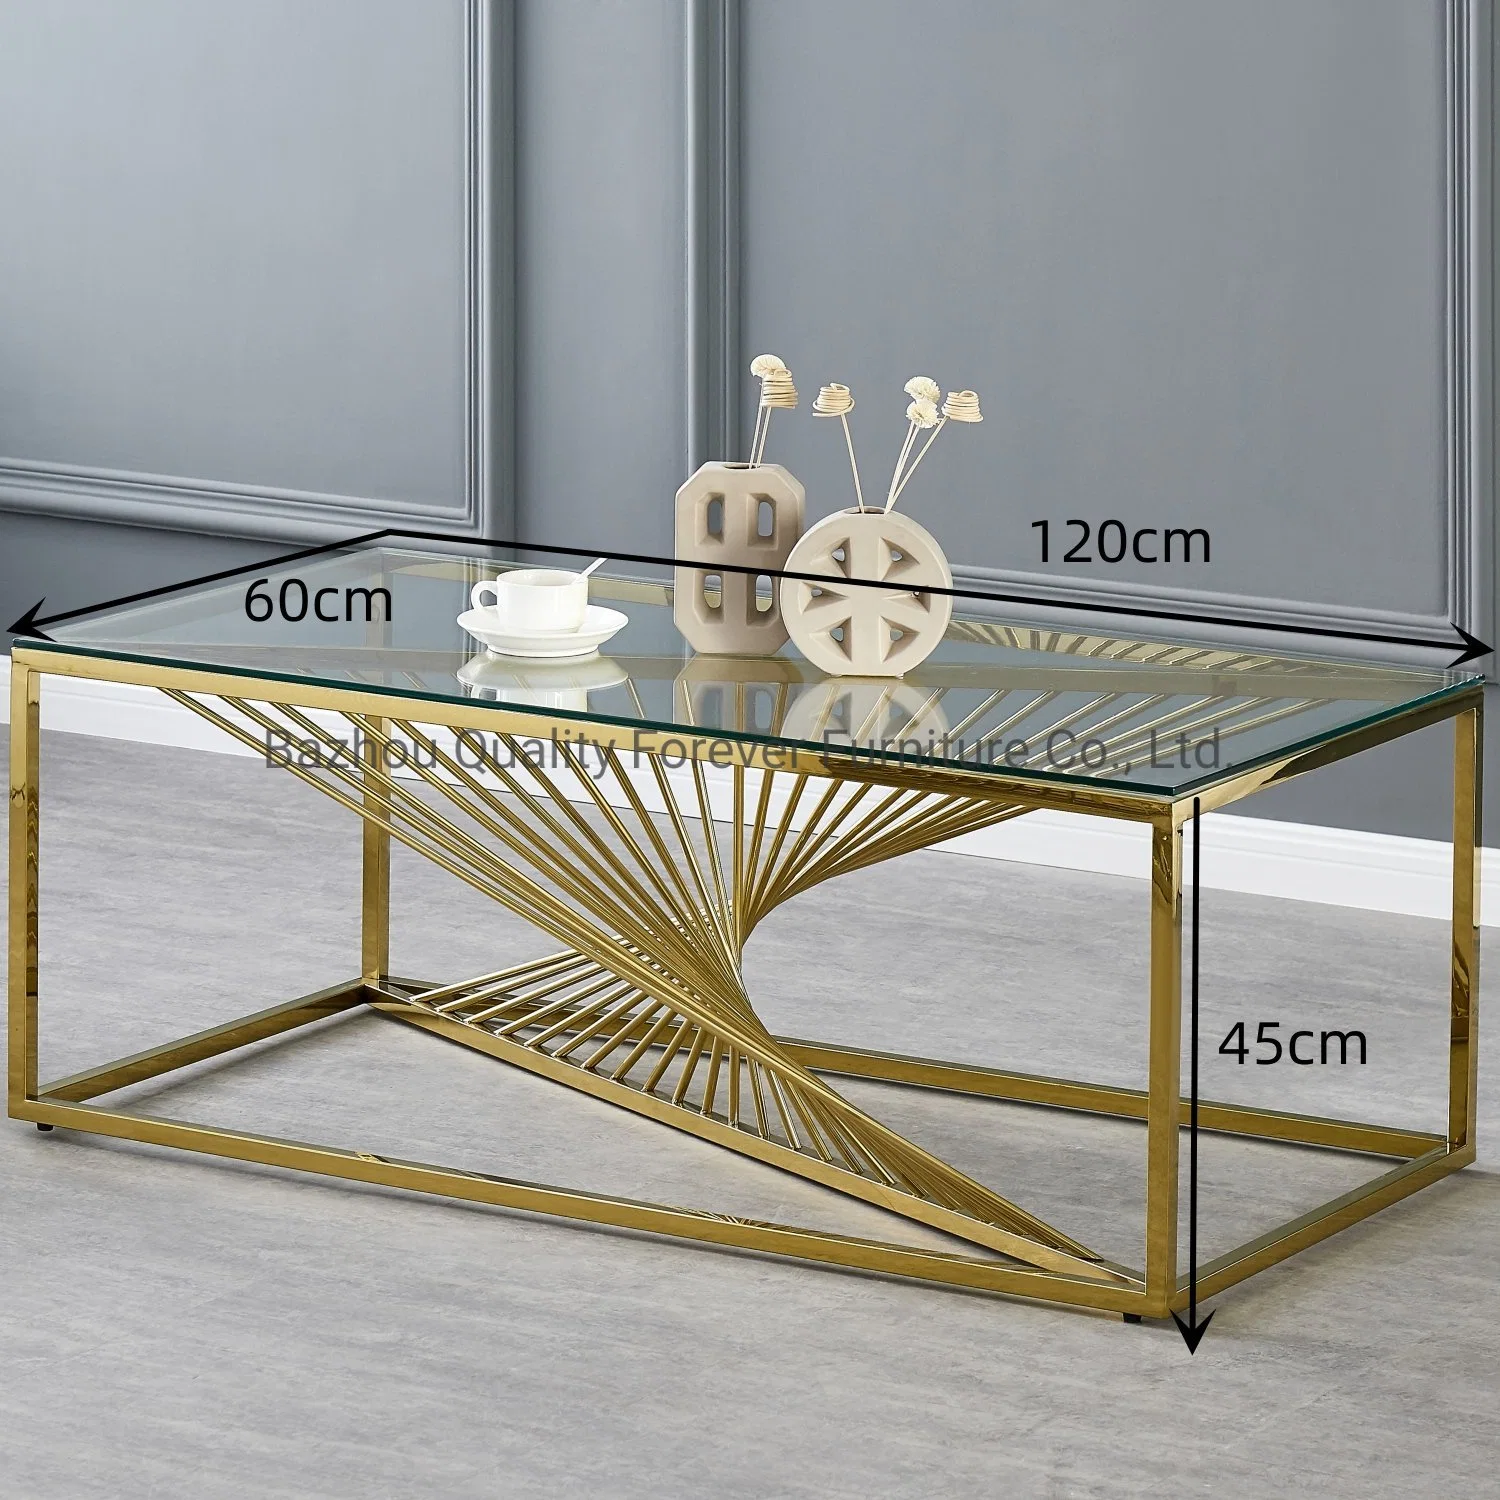 Wholesale/Supplier European Latest Design High Fashion Modern Clear Tempered Glass Gold Coffee Table Living Room Furniture